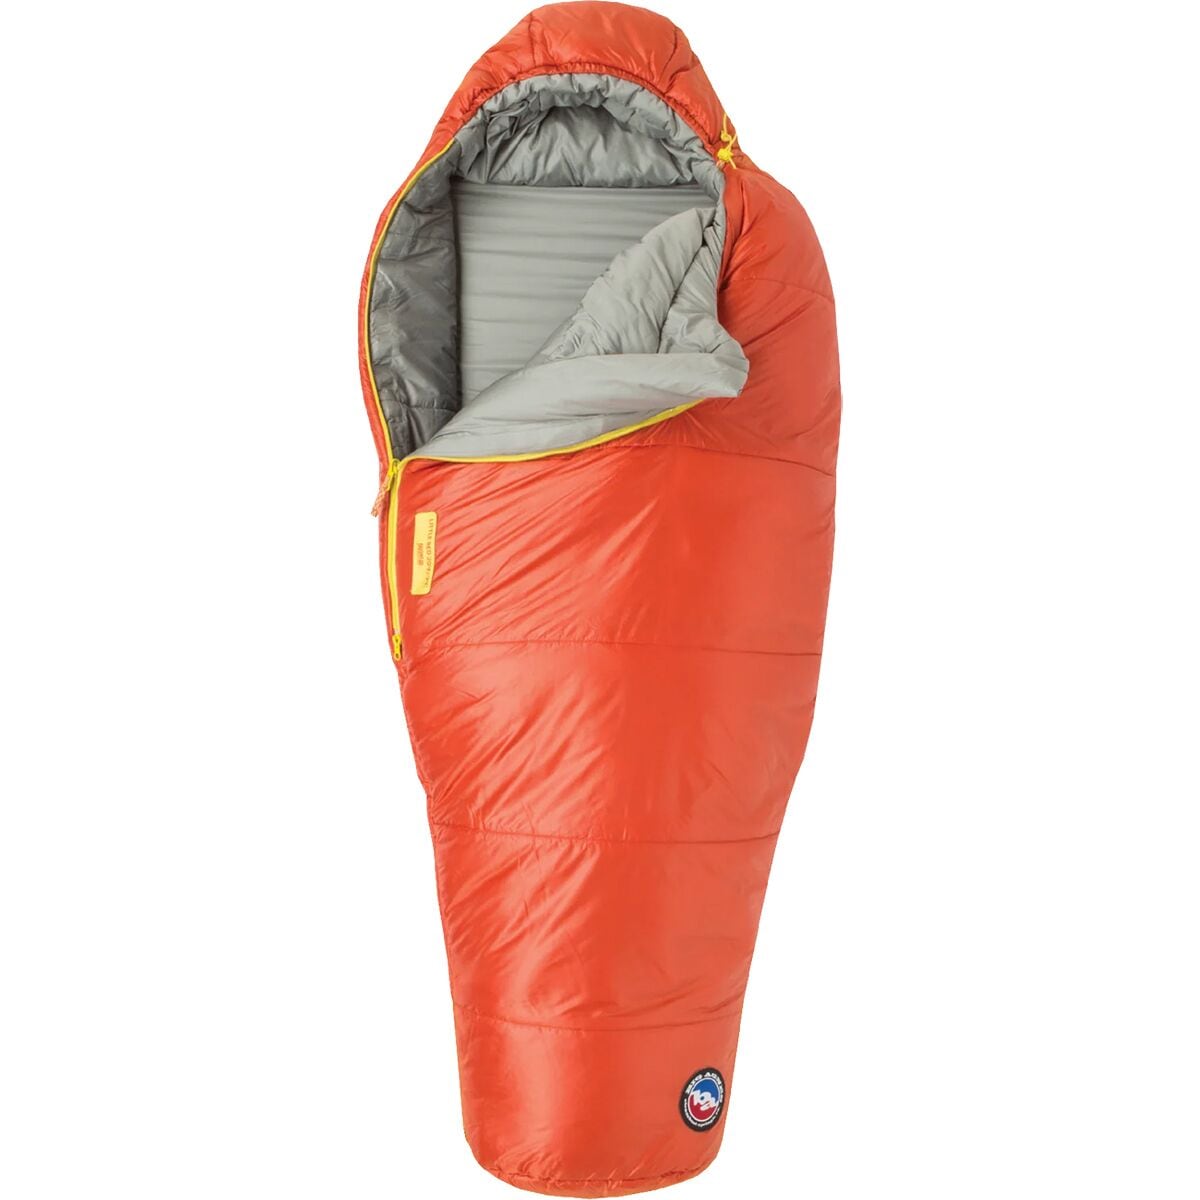 Photos - Suitcase / Backpack Cover Big Agnes Little Red Sleeping Bag: 20F Synthetic - Kids' 